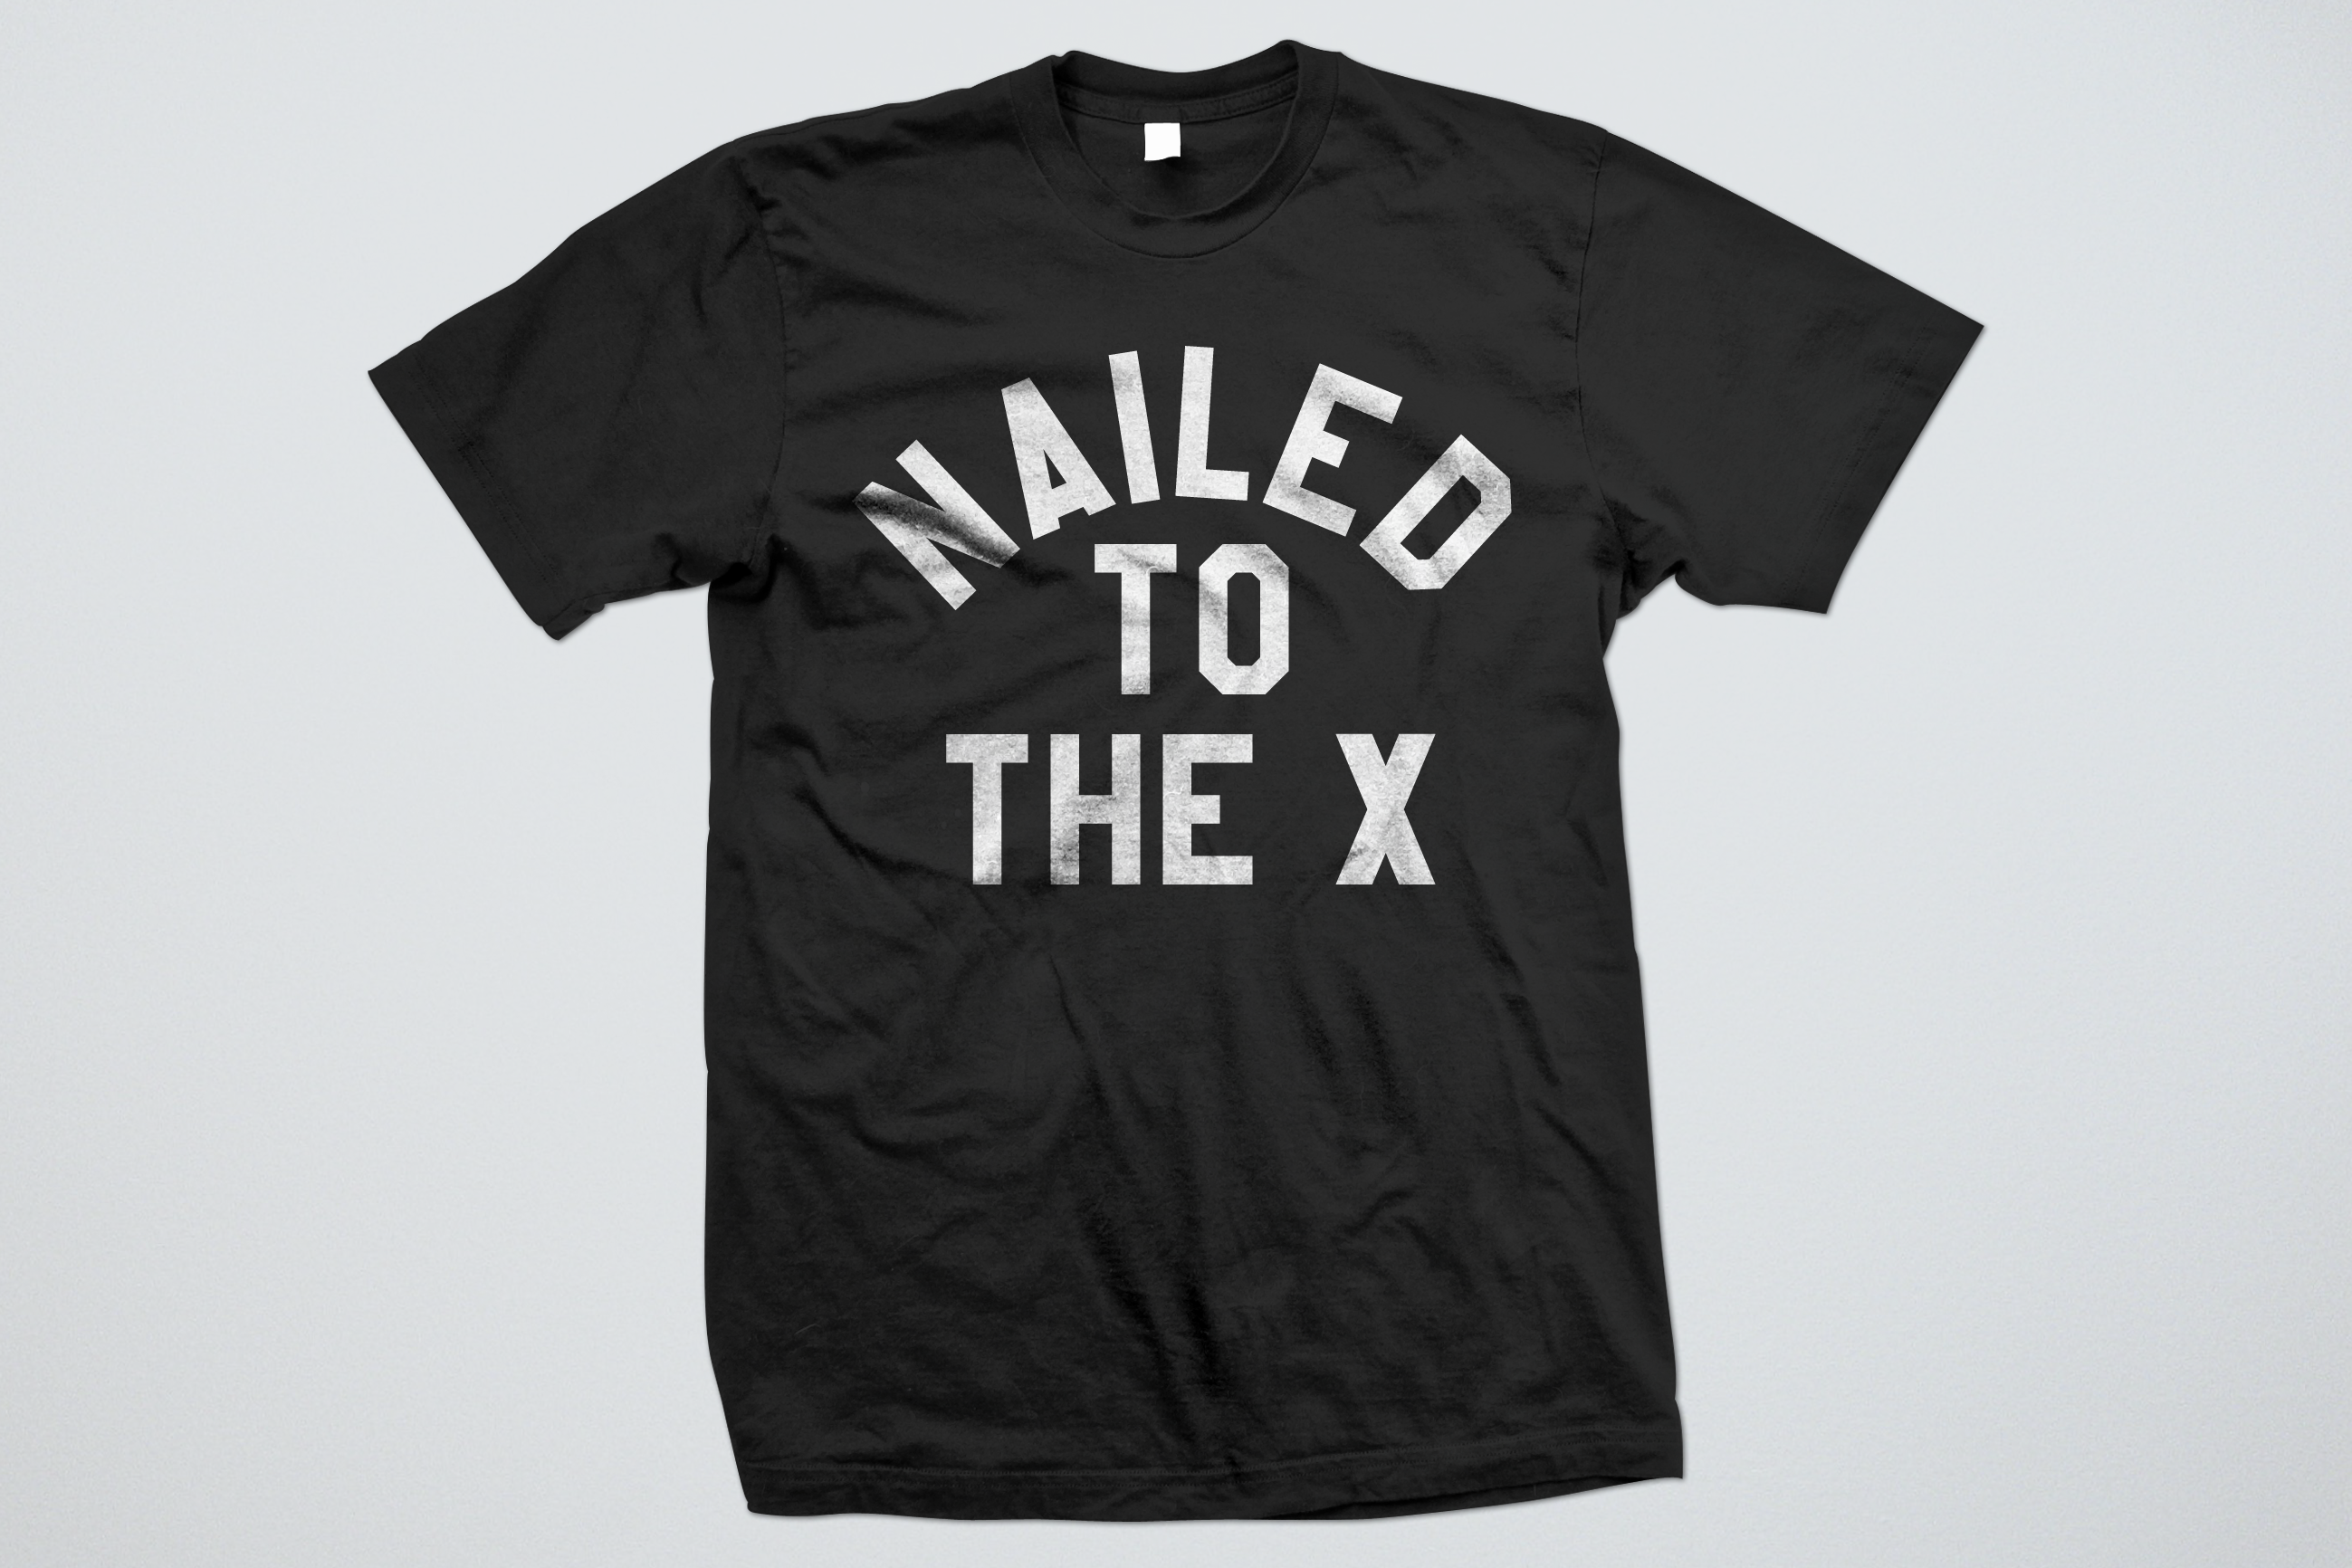 Nailed To The X Straight Edge Tshirt in black by STRAIGHTEDGEWORLDWIDE